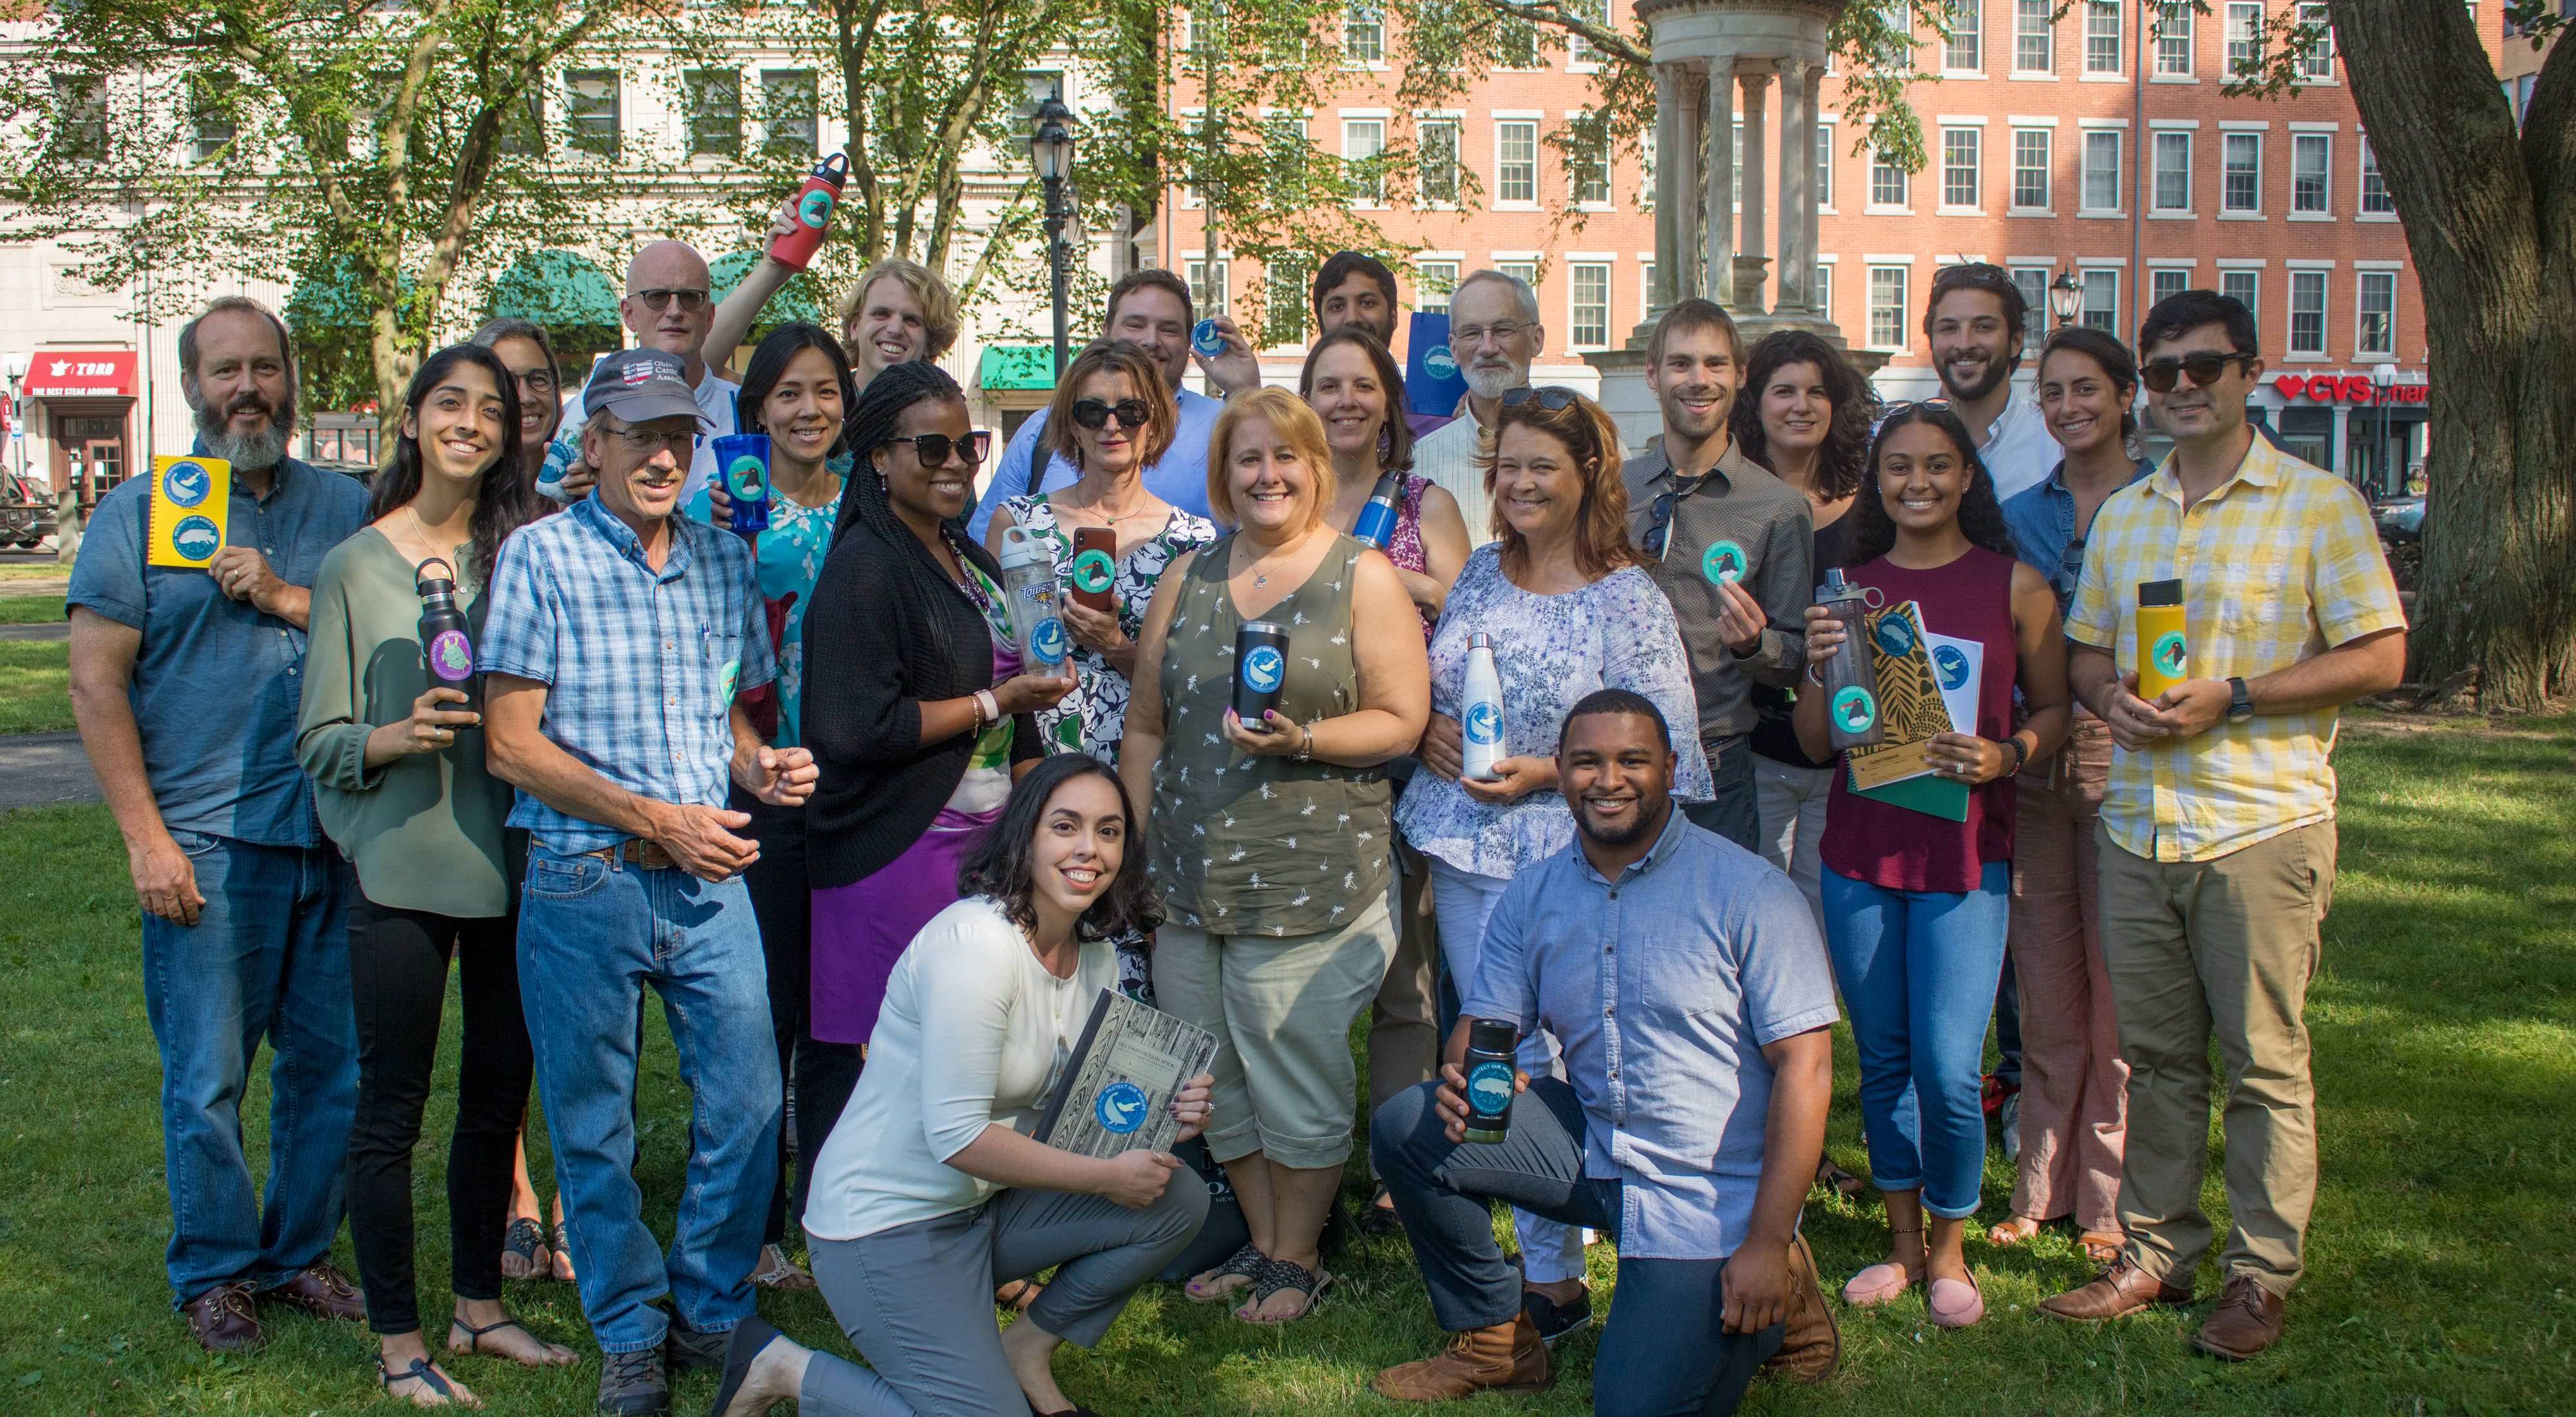 Staff from the Connecticut Nature Conservancy office pose for a group photo.